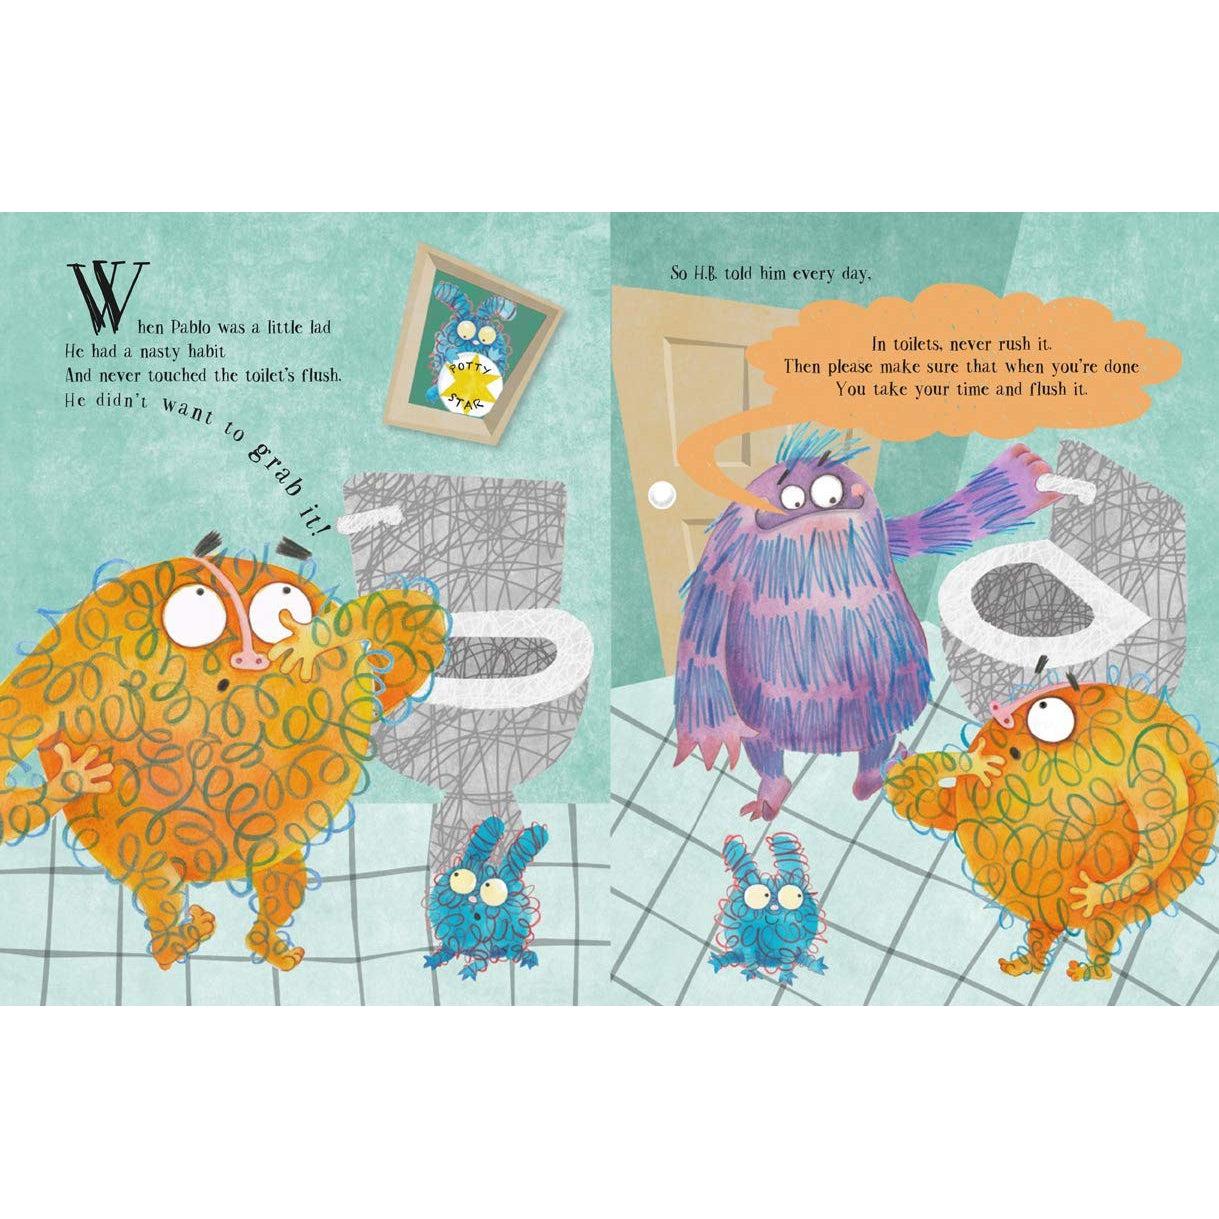 When You'Ve Gotta Go! (The Scribble Monsters' Guide To Modern Manners) - John Townsend & Carolyn Scrace